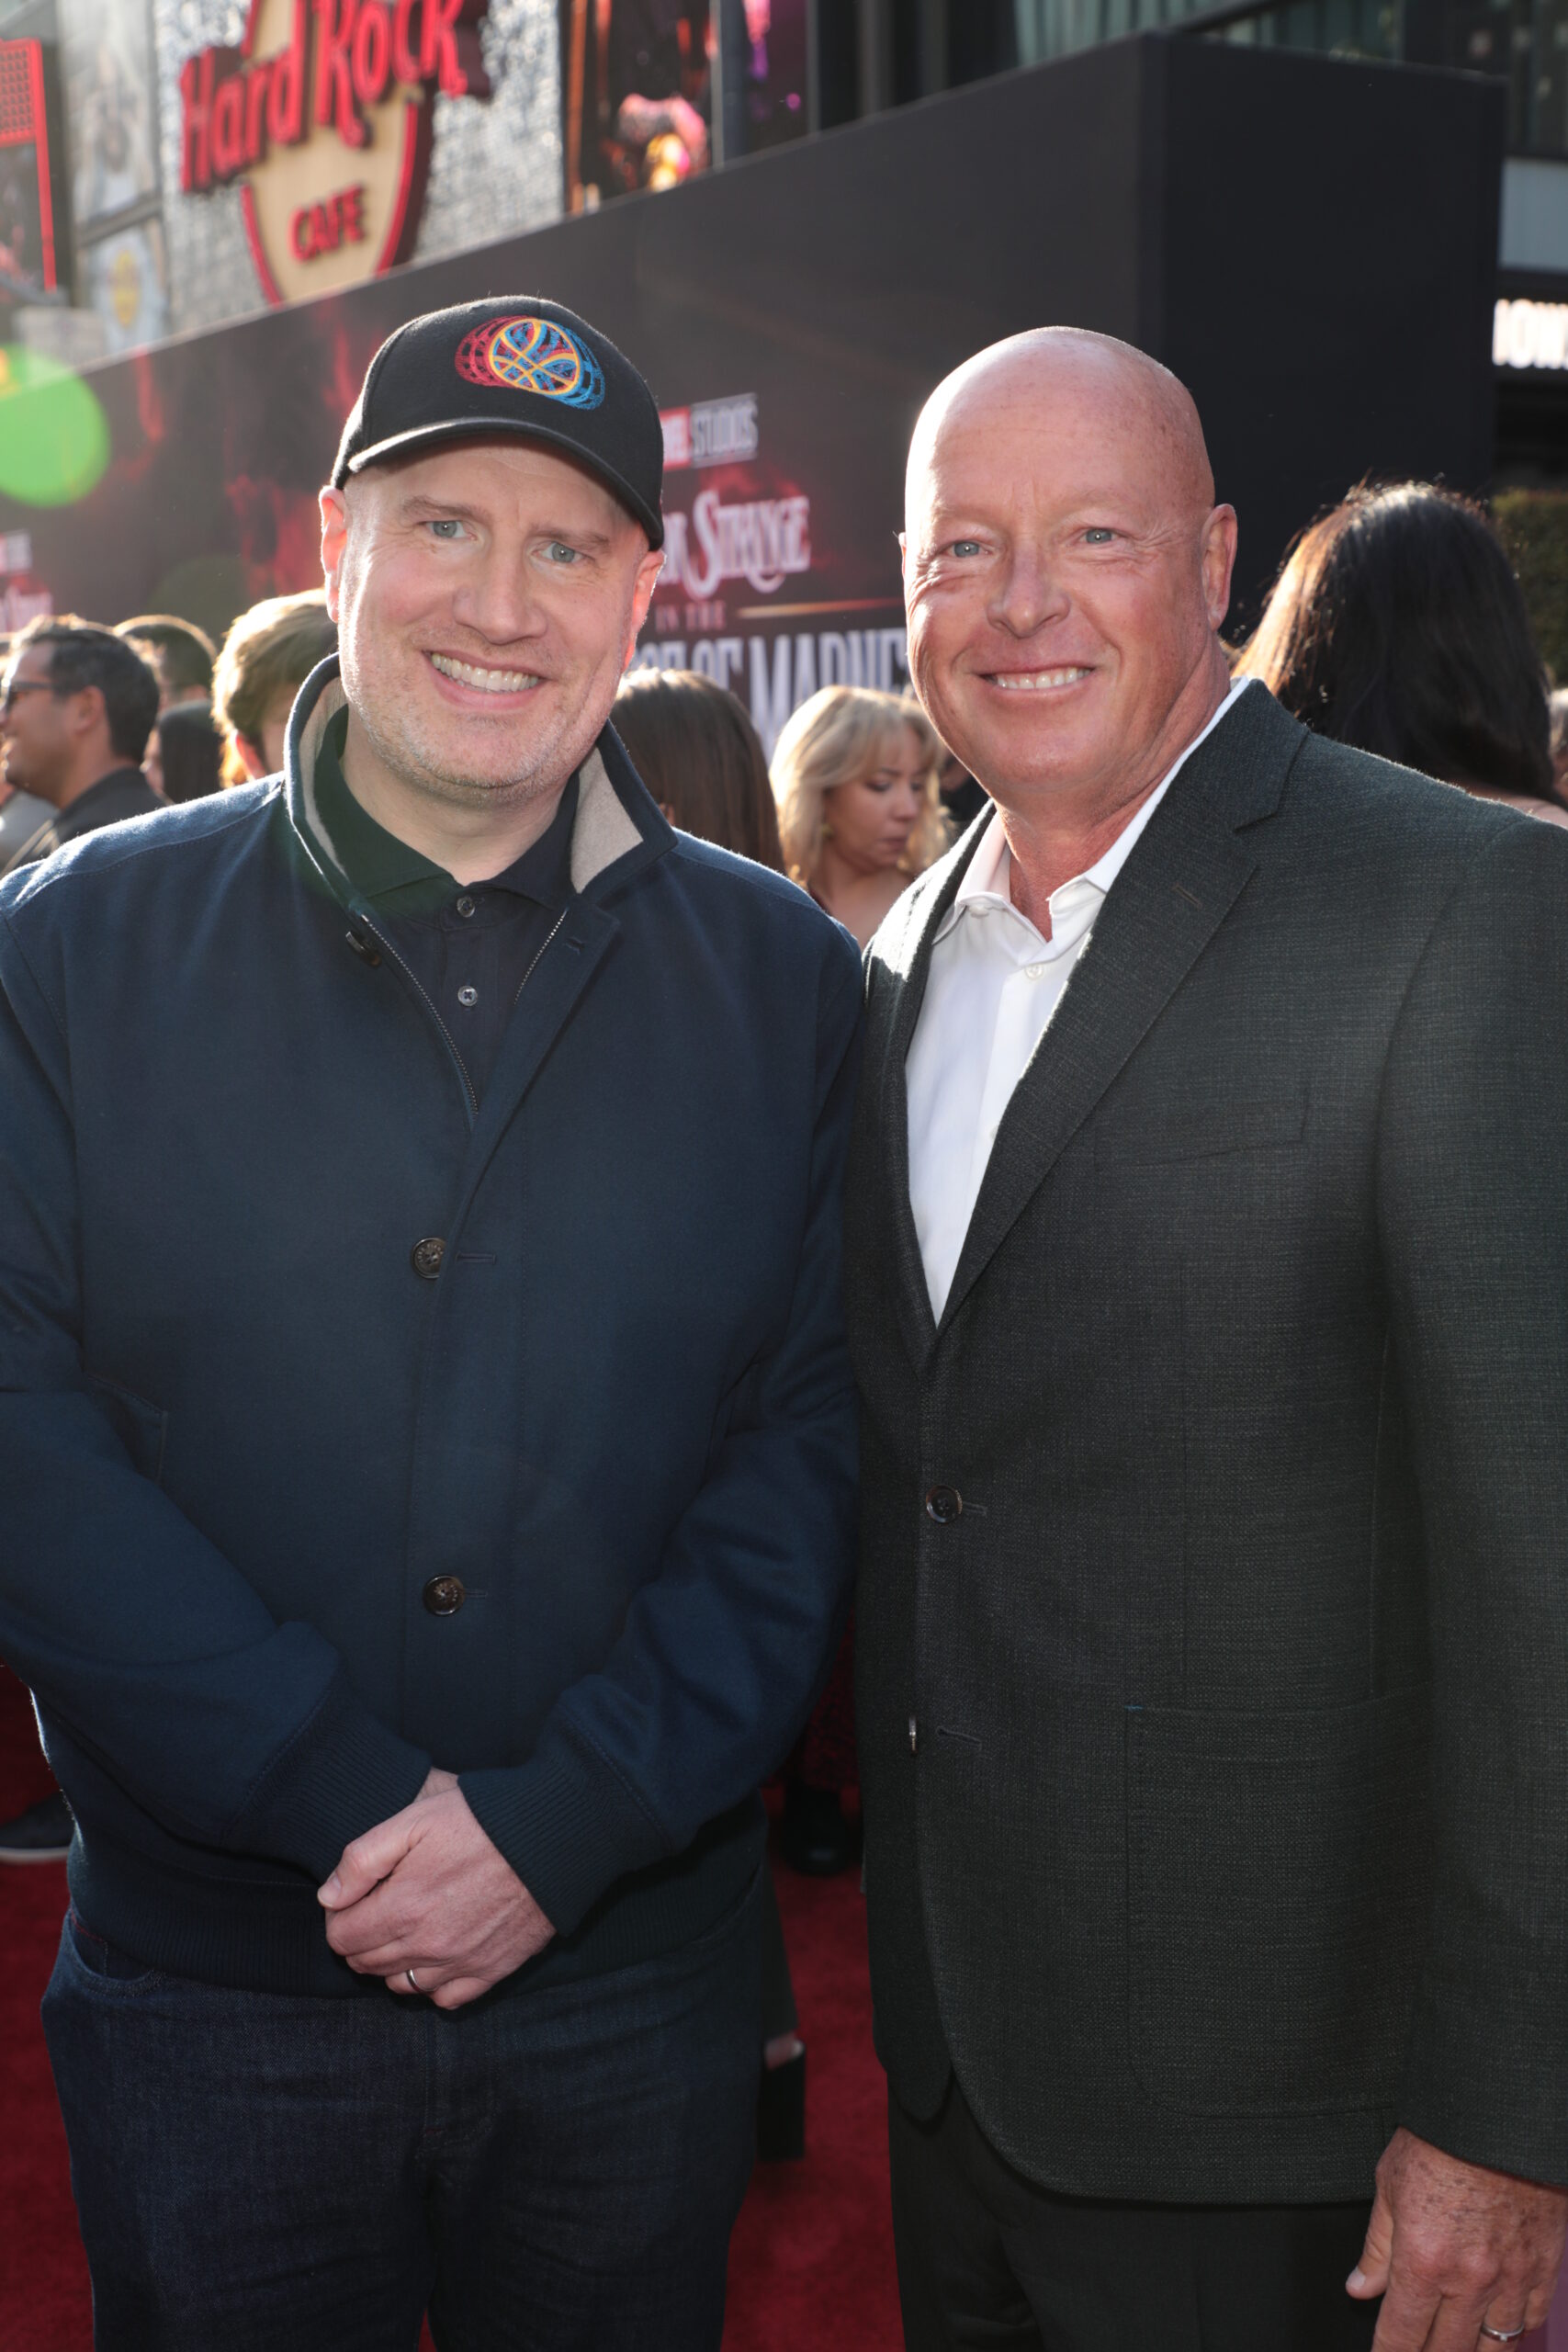 Producer Kevin Feige and Bob Chapek attend the Doctor Strange in the Multiverse of Madness World Premiere at the Dolby Theatre in Hollywood, CA on Monday, May 2, 2022. (photo: Alex J. Berliner/ABImages)